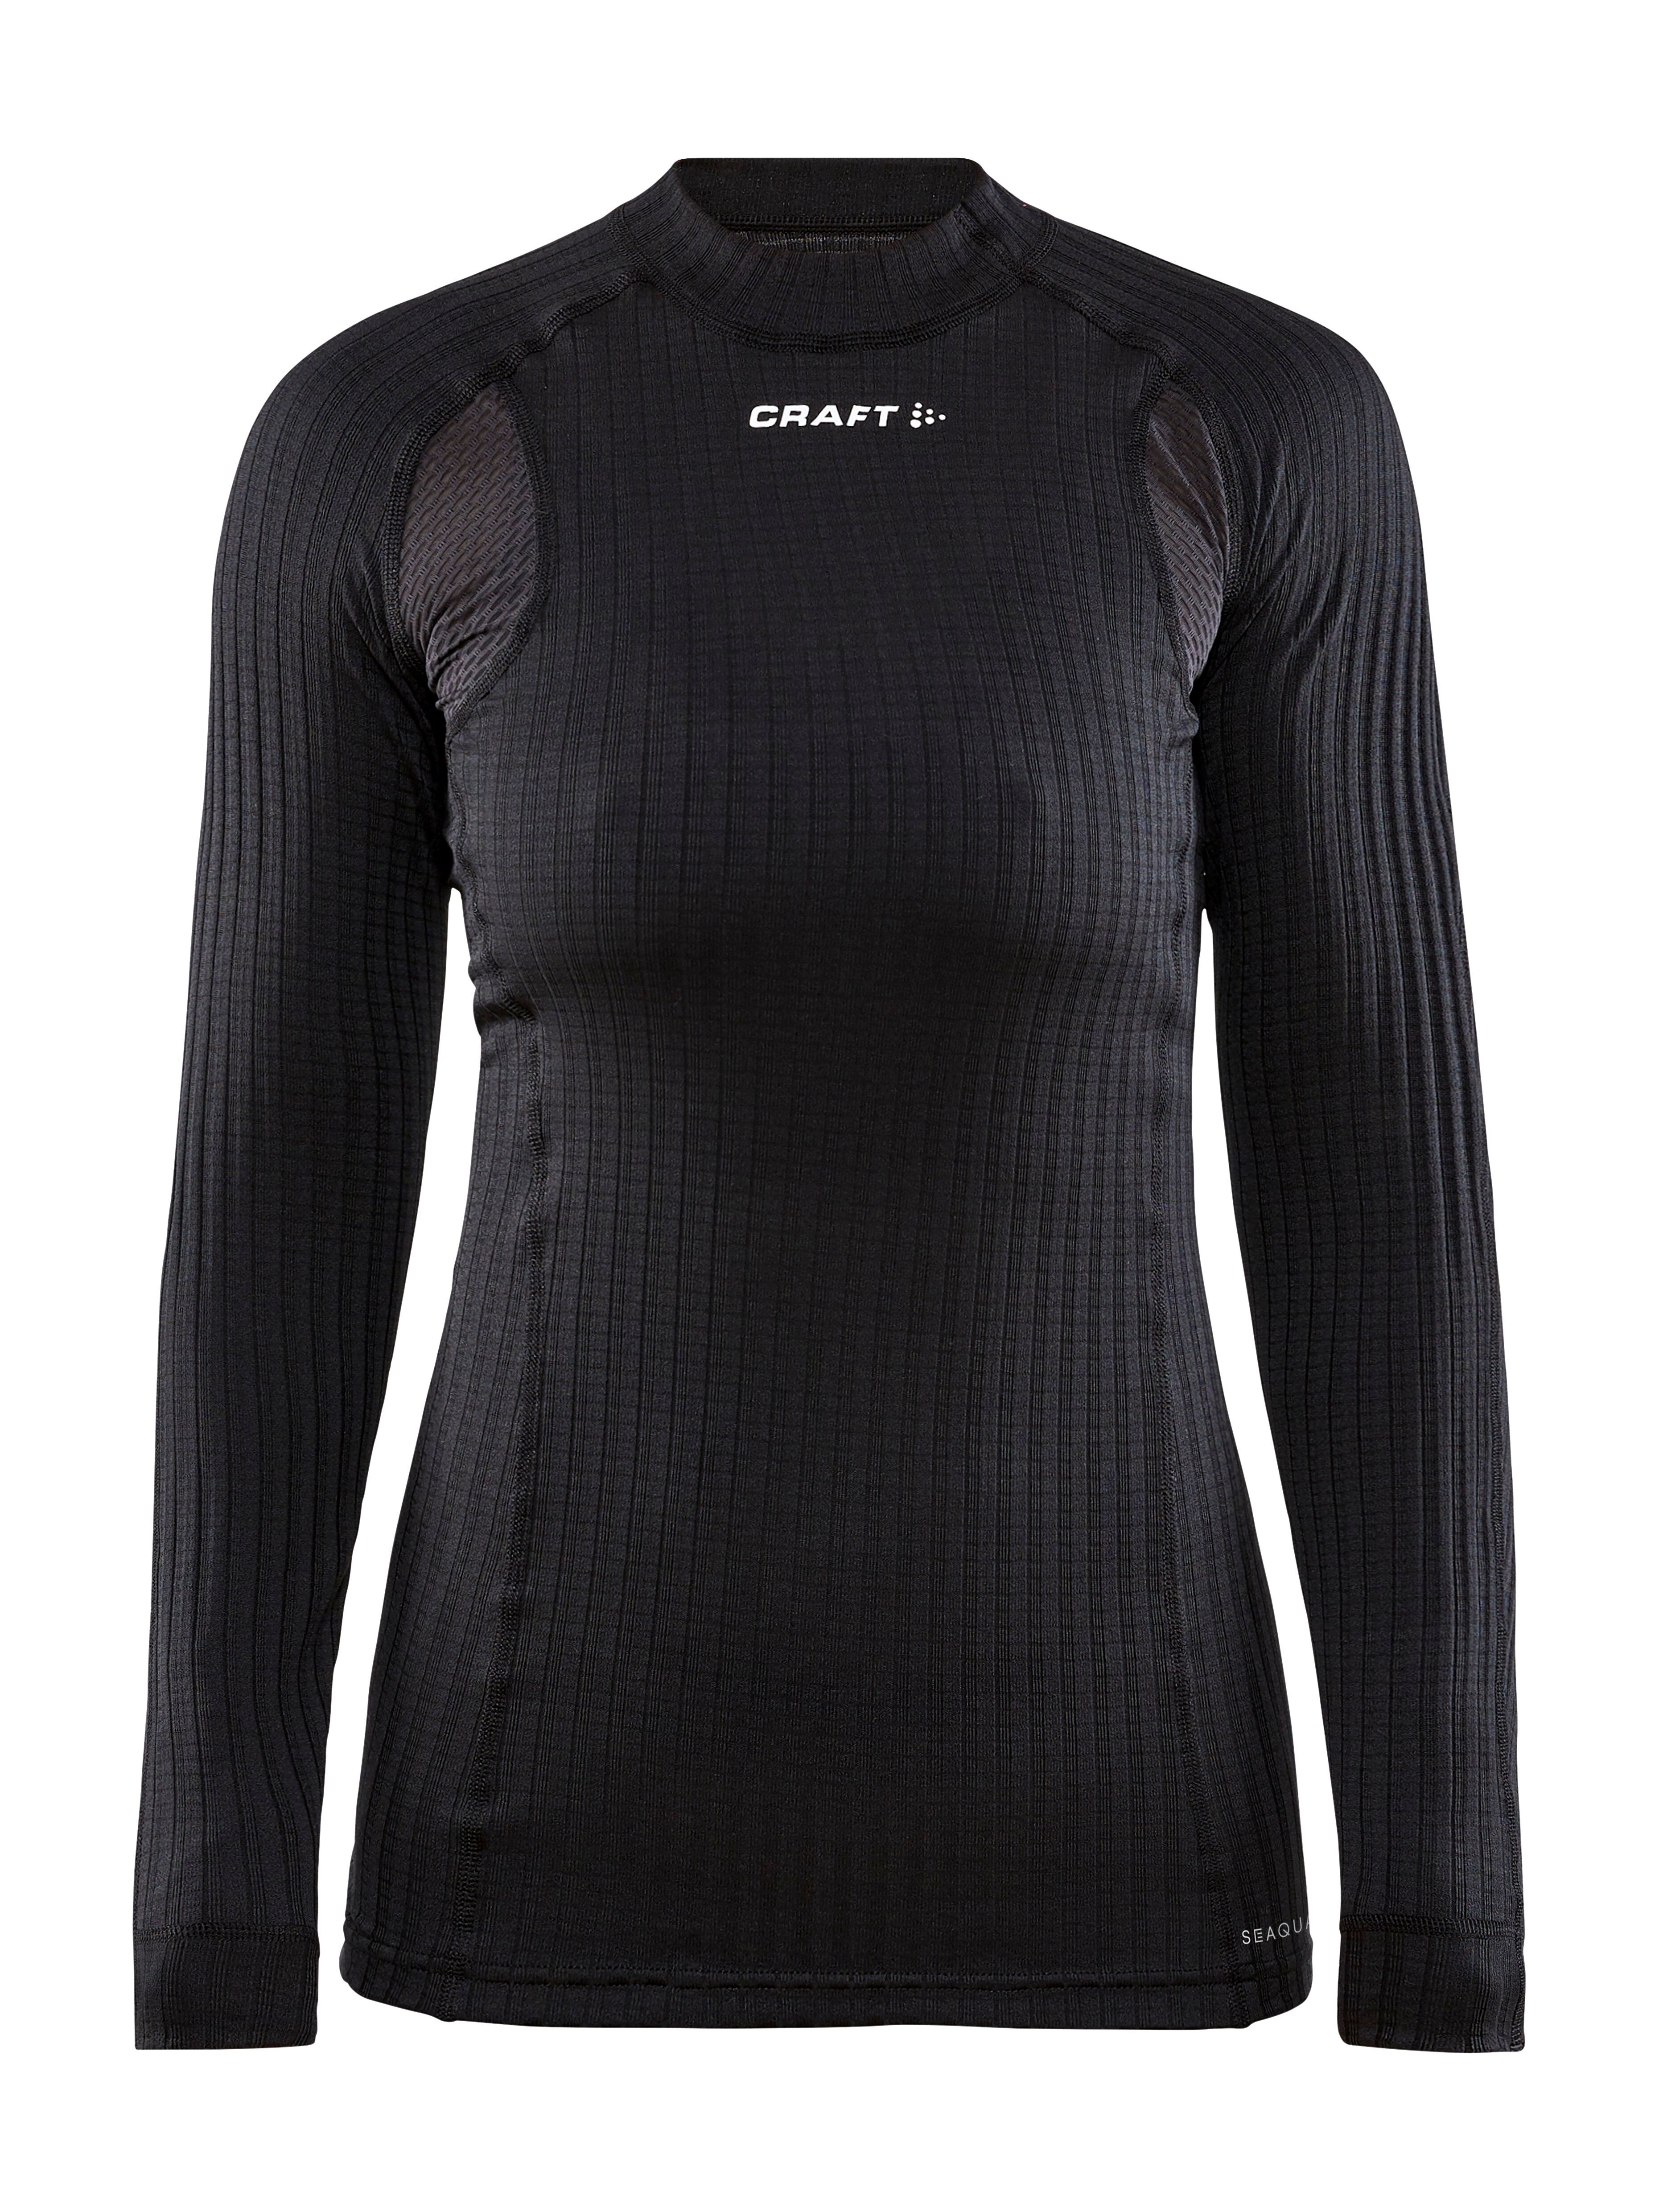 Craft Active Extreme X Cn Ls - Base layer - Women's